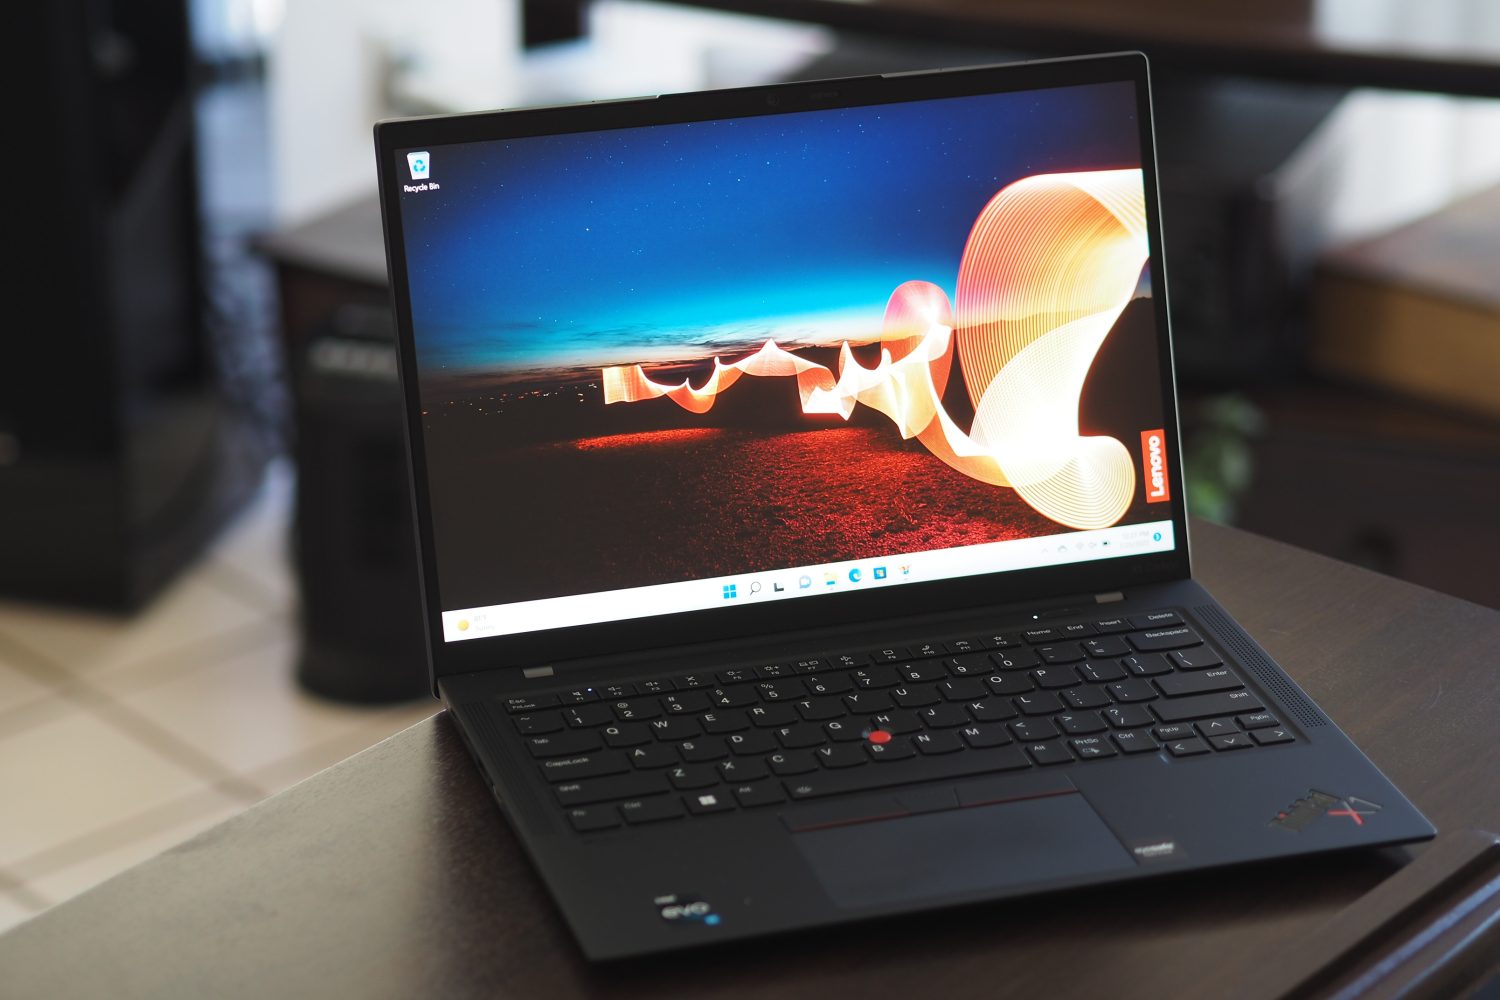 The ThinkPad X1 Carbon Gen 10 laptop, opened with a colorful wallpaper on the screen.